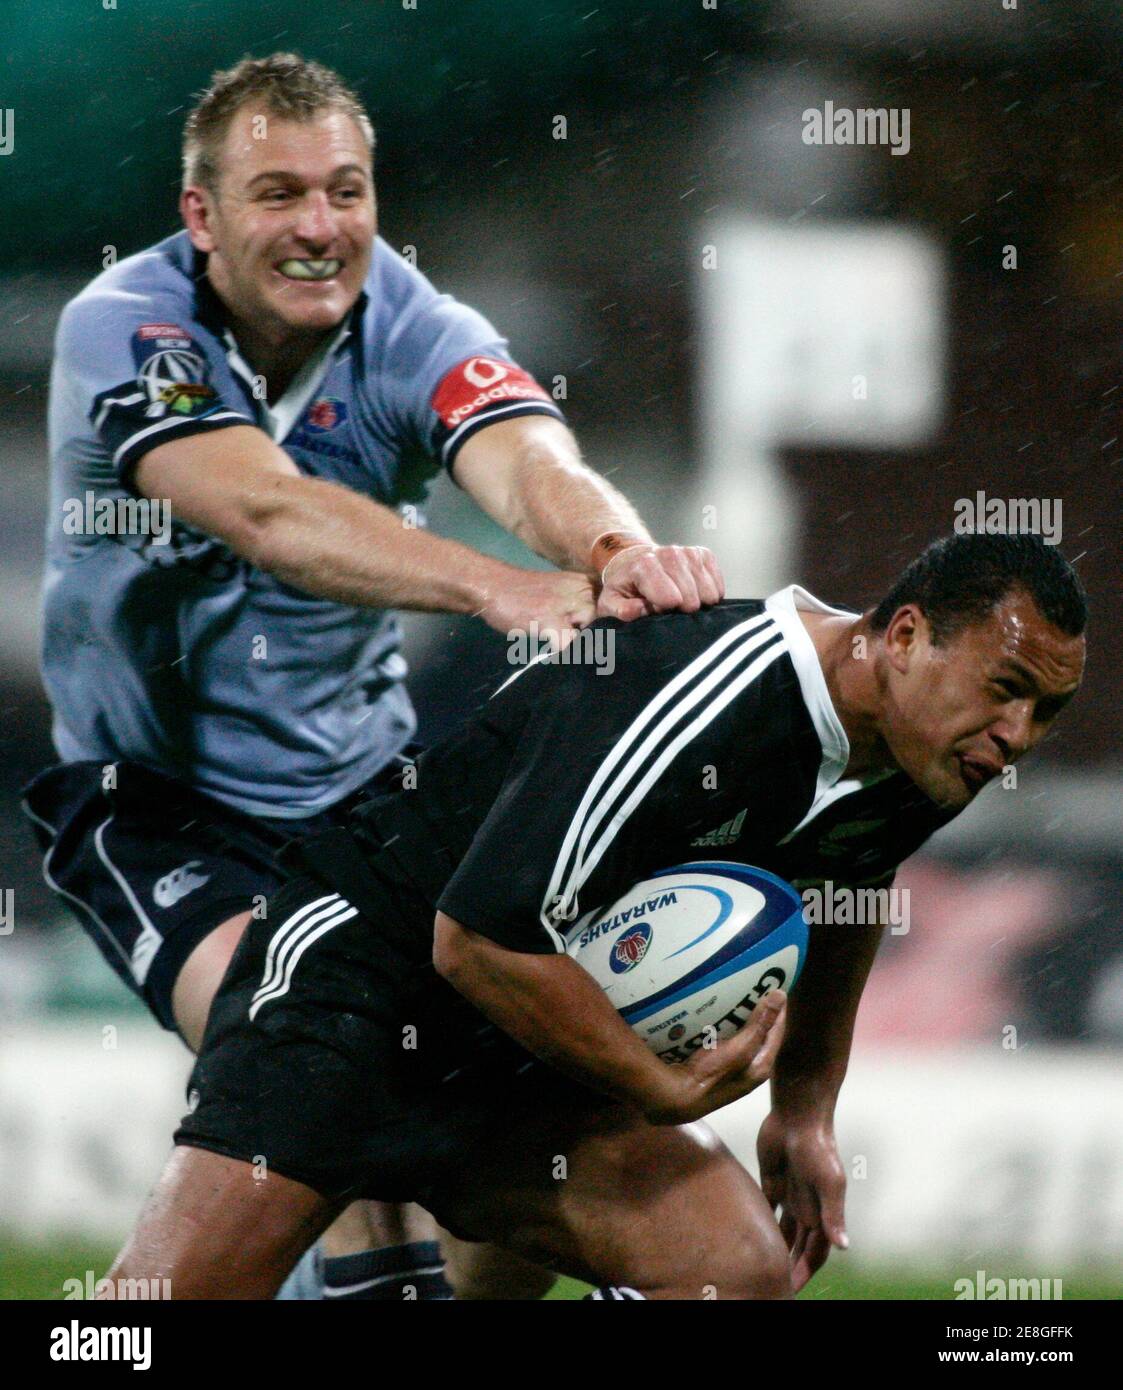 Pehi Te Whare of the New Zealand Maori (R) beats the tackle of Peter Hewat of the New South Wales Waratahs during their international rugby union match in Sydney June 2, 2006. REUTERS/Will Burgess (AUSTRALIA) Stock Photo